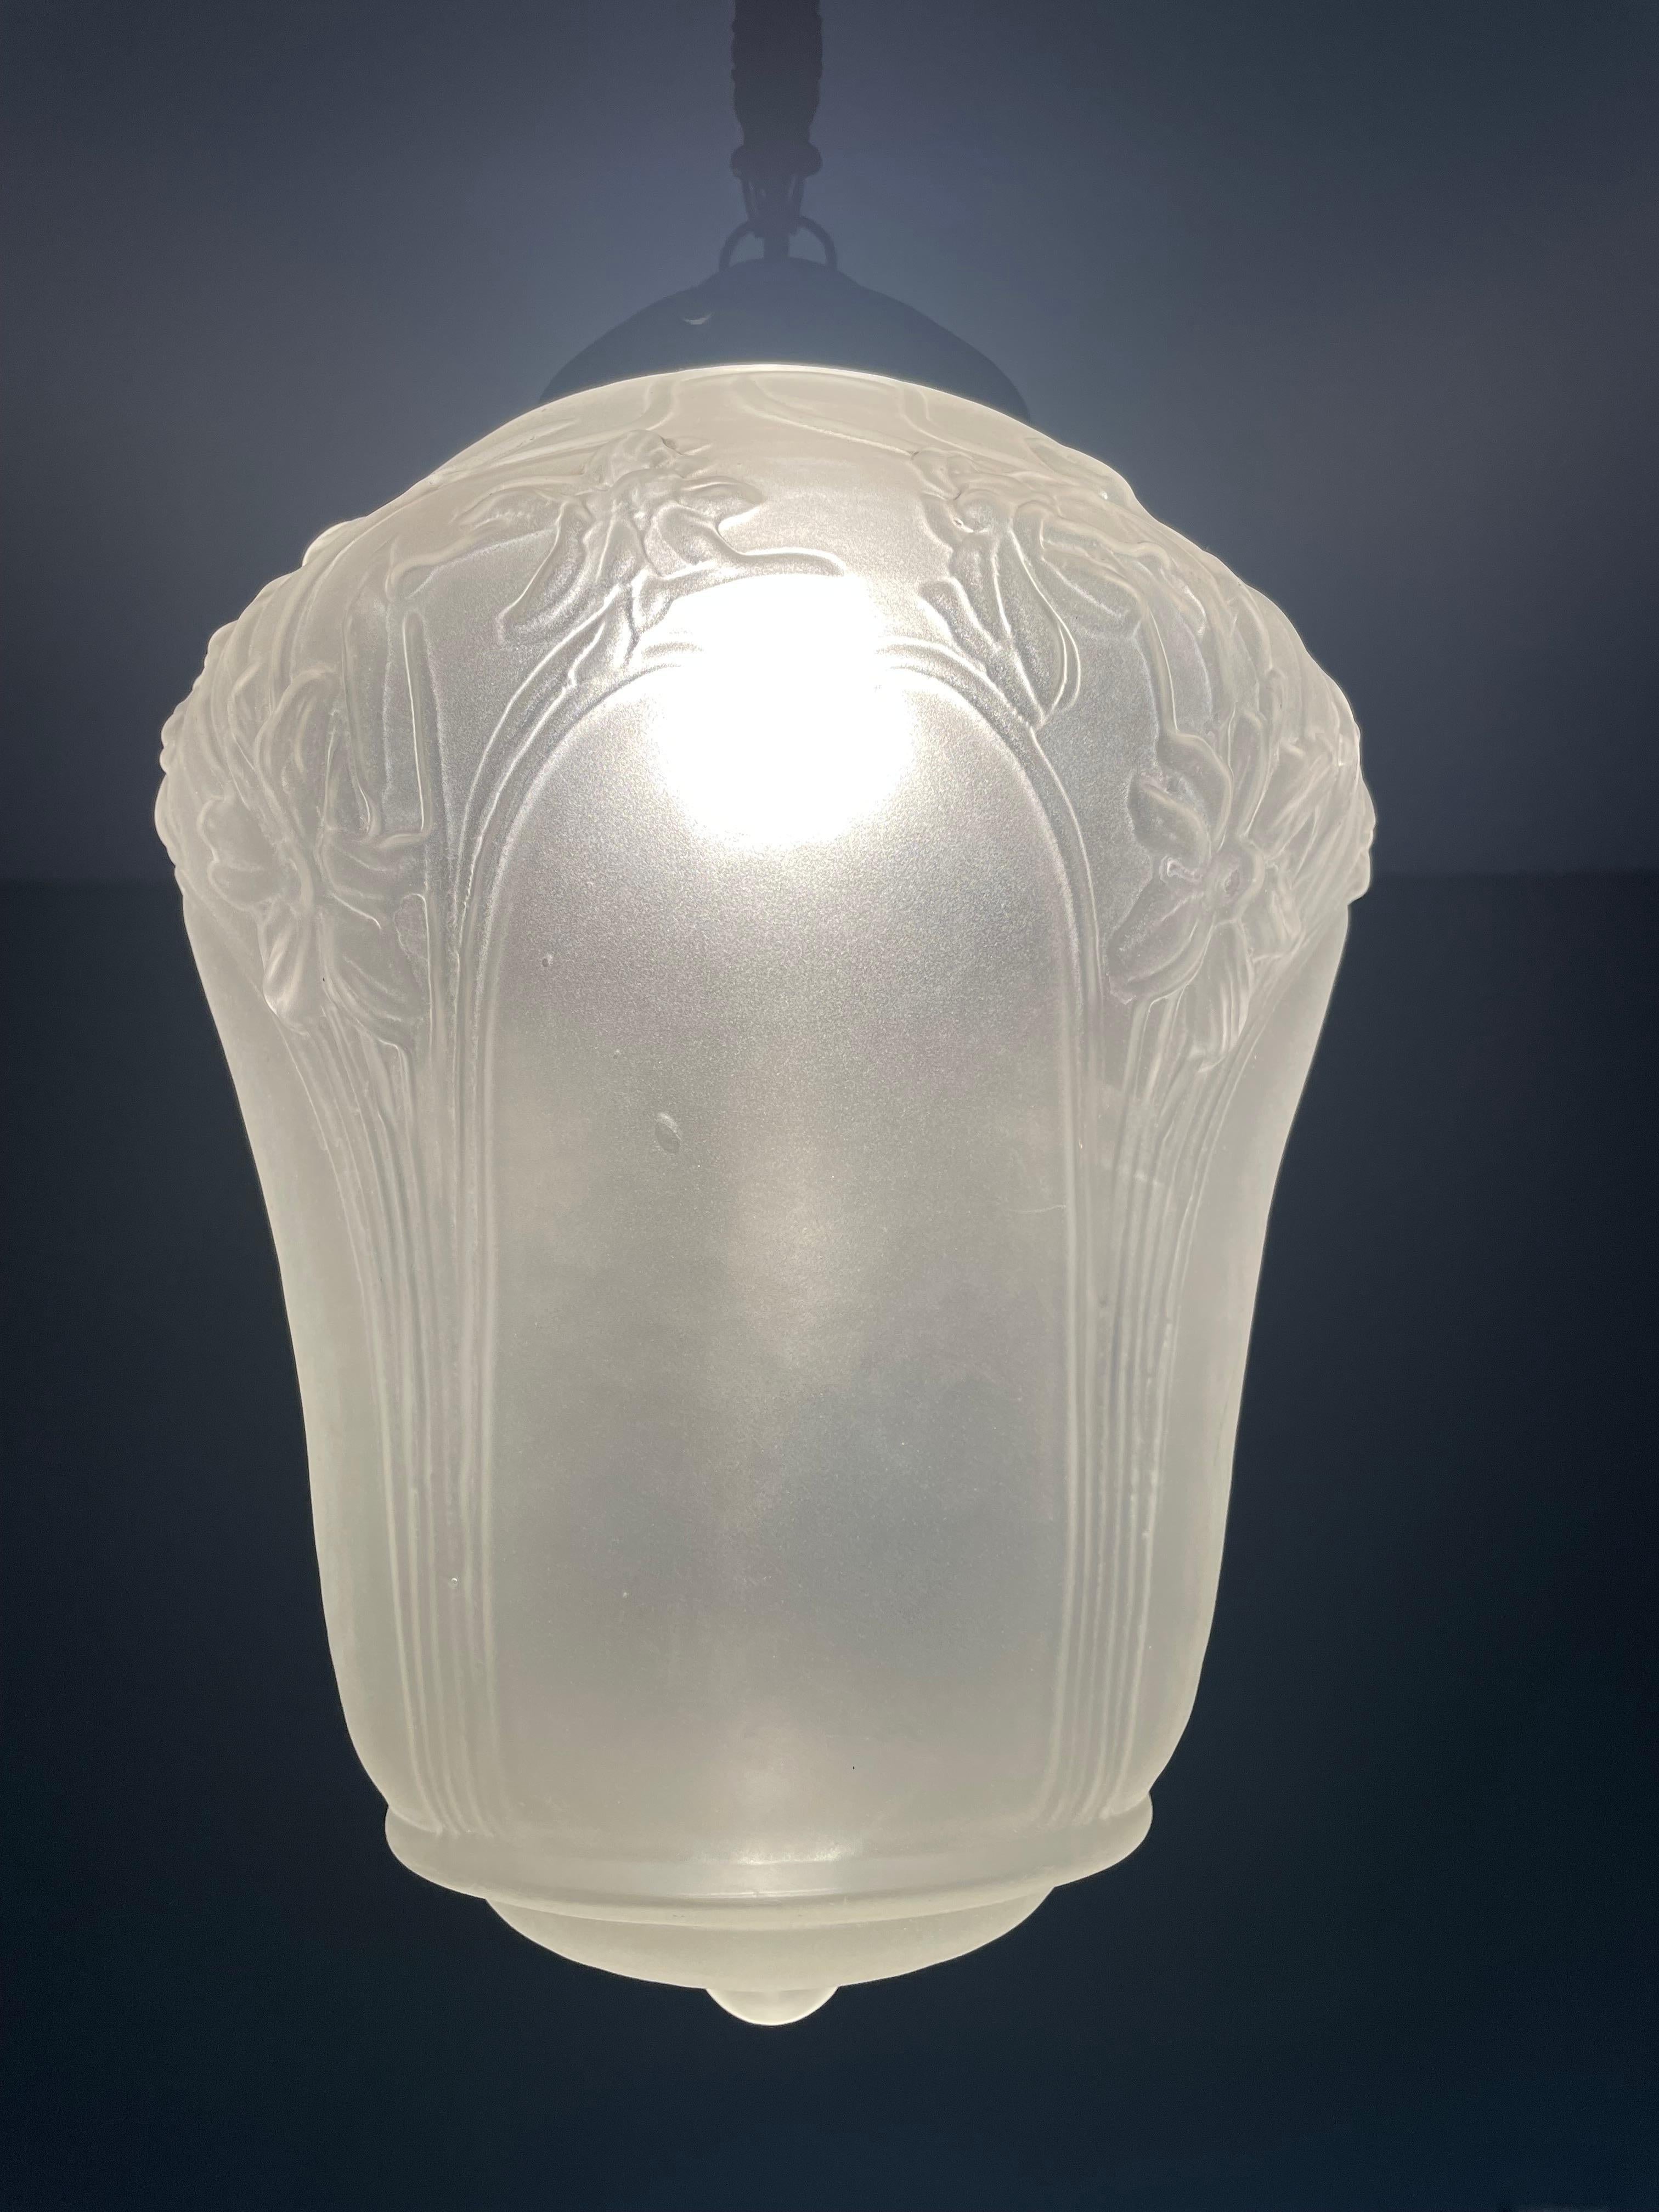 All original and aesthetically perfect glass and brass pendant.

With early 20th century light fixtures as one of our specialities, we are always thrilled to find antique pendant lights that we have never seen before. This superb condition Arts and